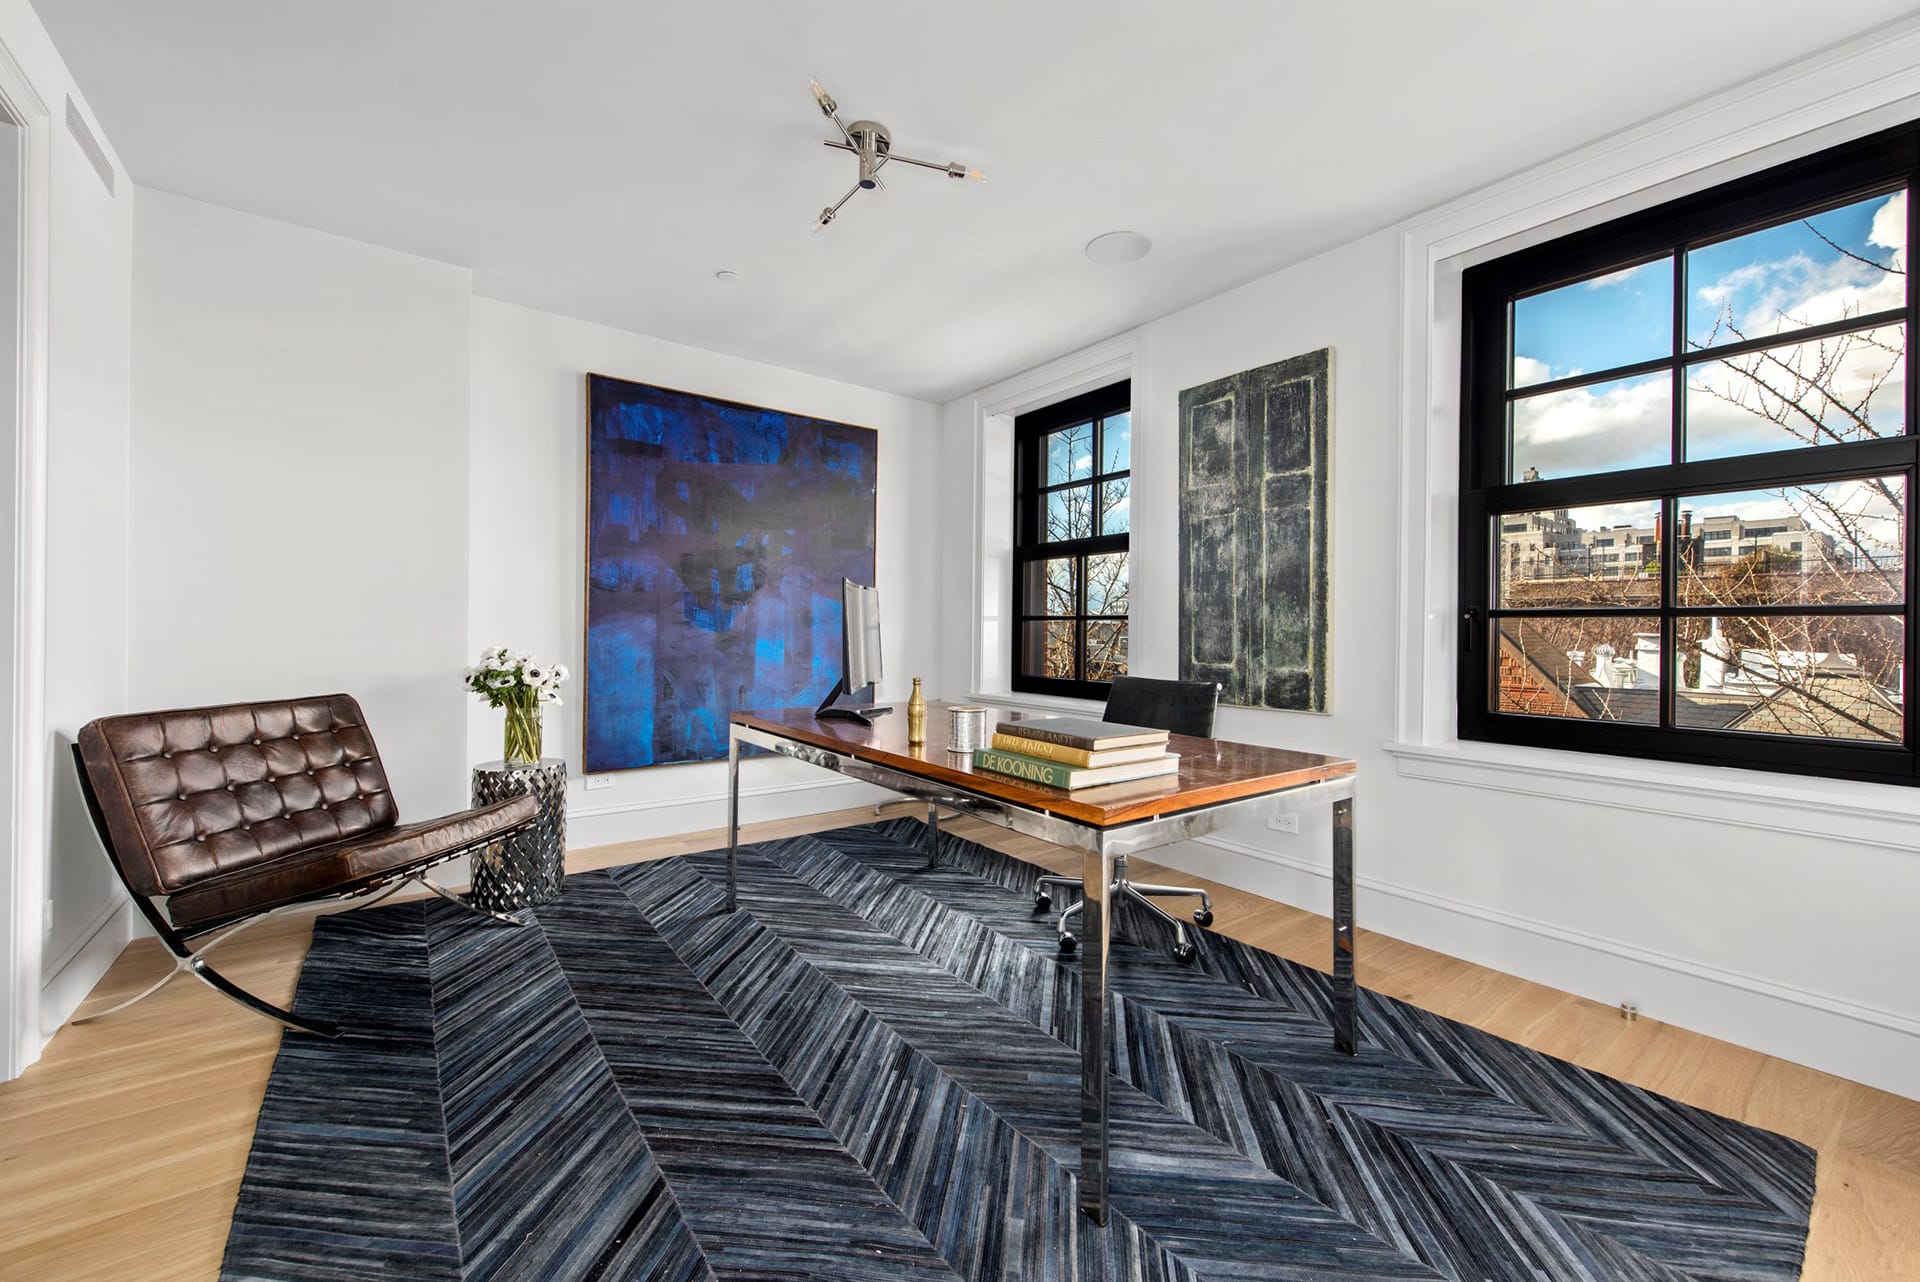 Office with a chrome and lacquered wood desk, office chair, and a guest chair next to it. Two large paintings hang on the walls, and a large blue chevron area rug covers the white oak floors.